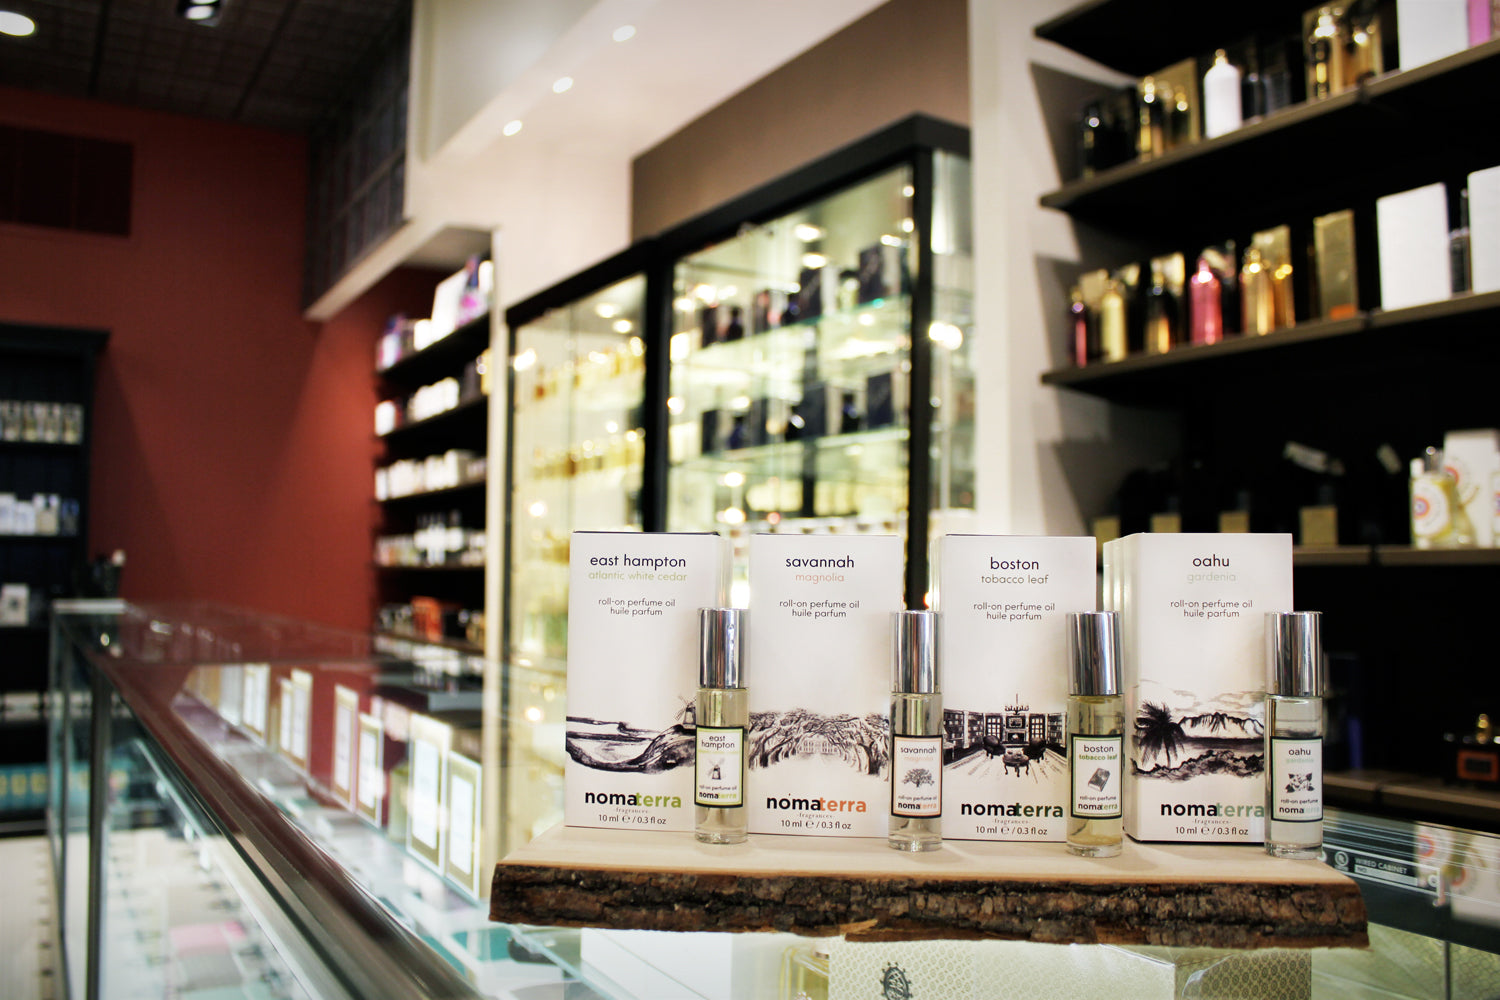 Nomaterra Perfume Oils Now Available at Merz Apothecary in Chicago